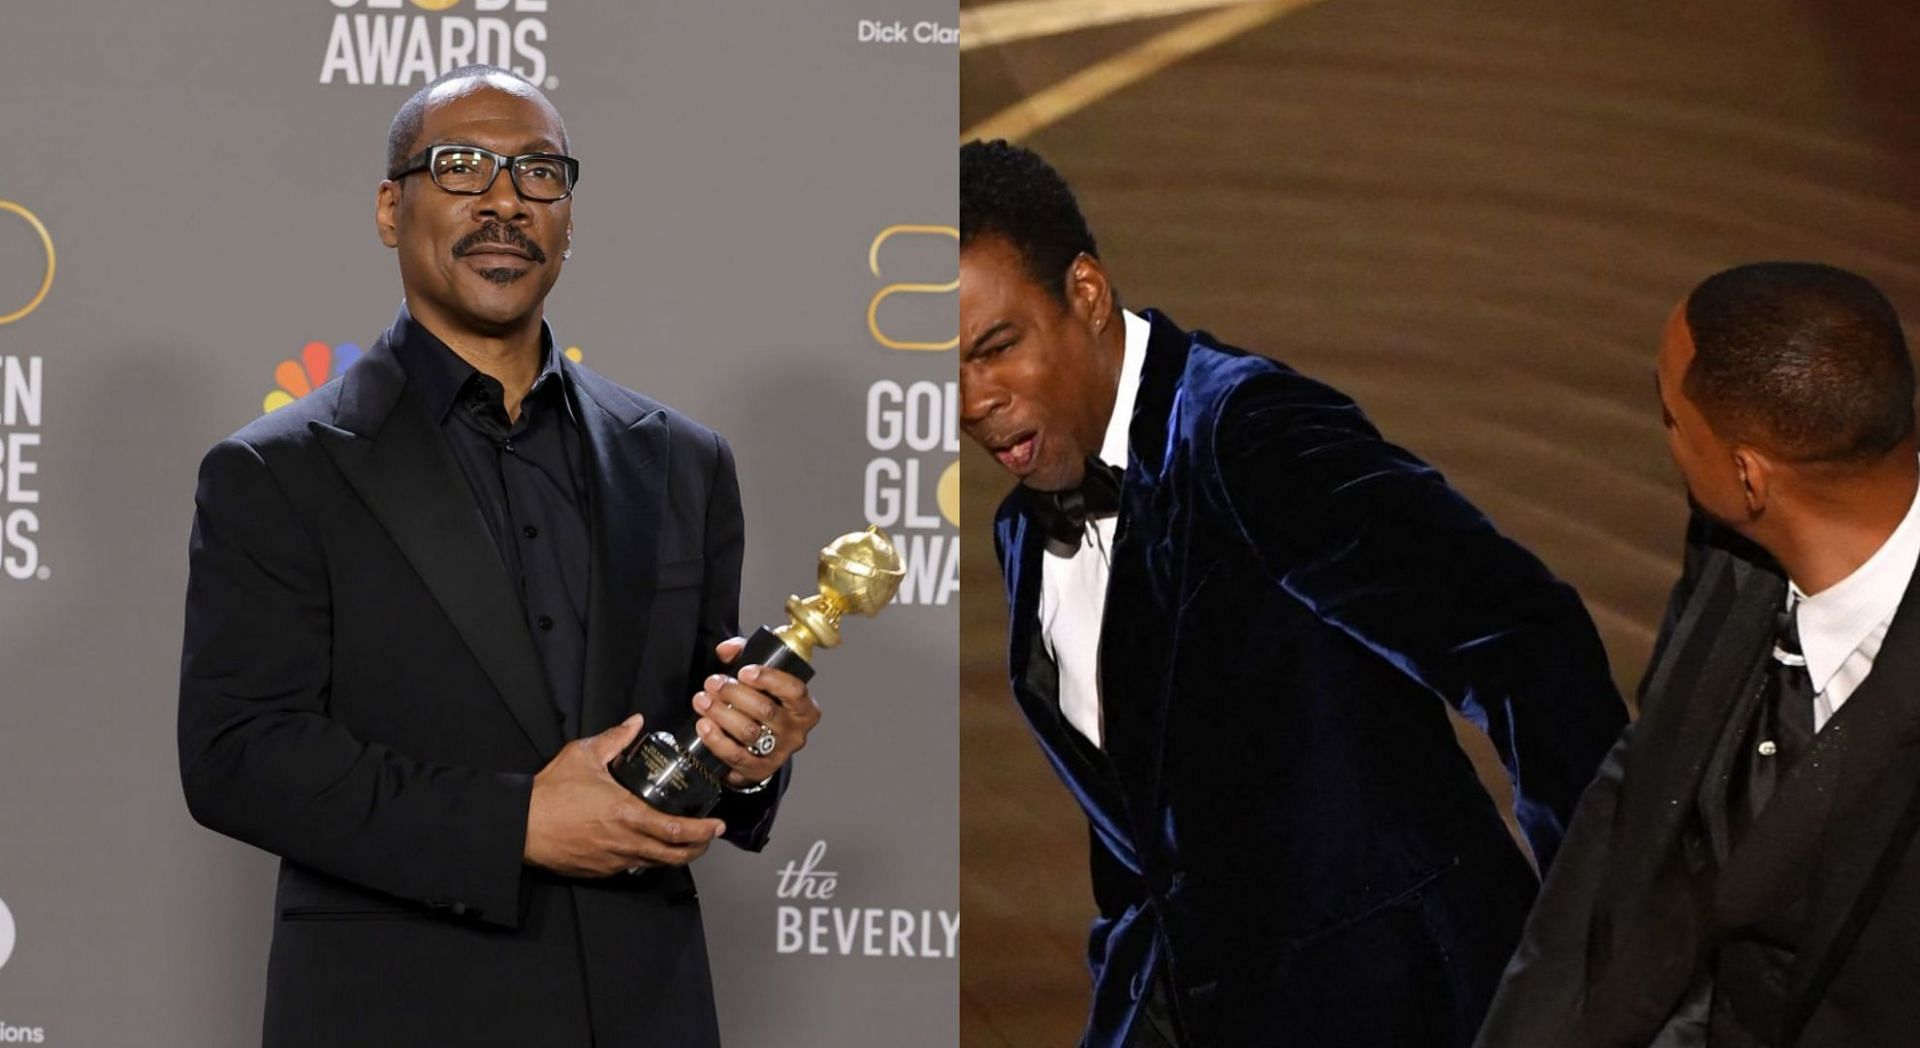 Eddie Murphy made at joke about Will Smith and Chris Rock Oscar